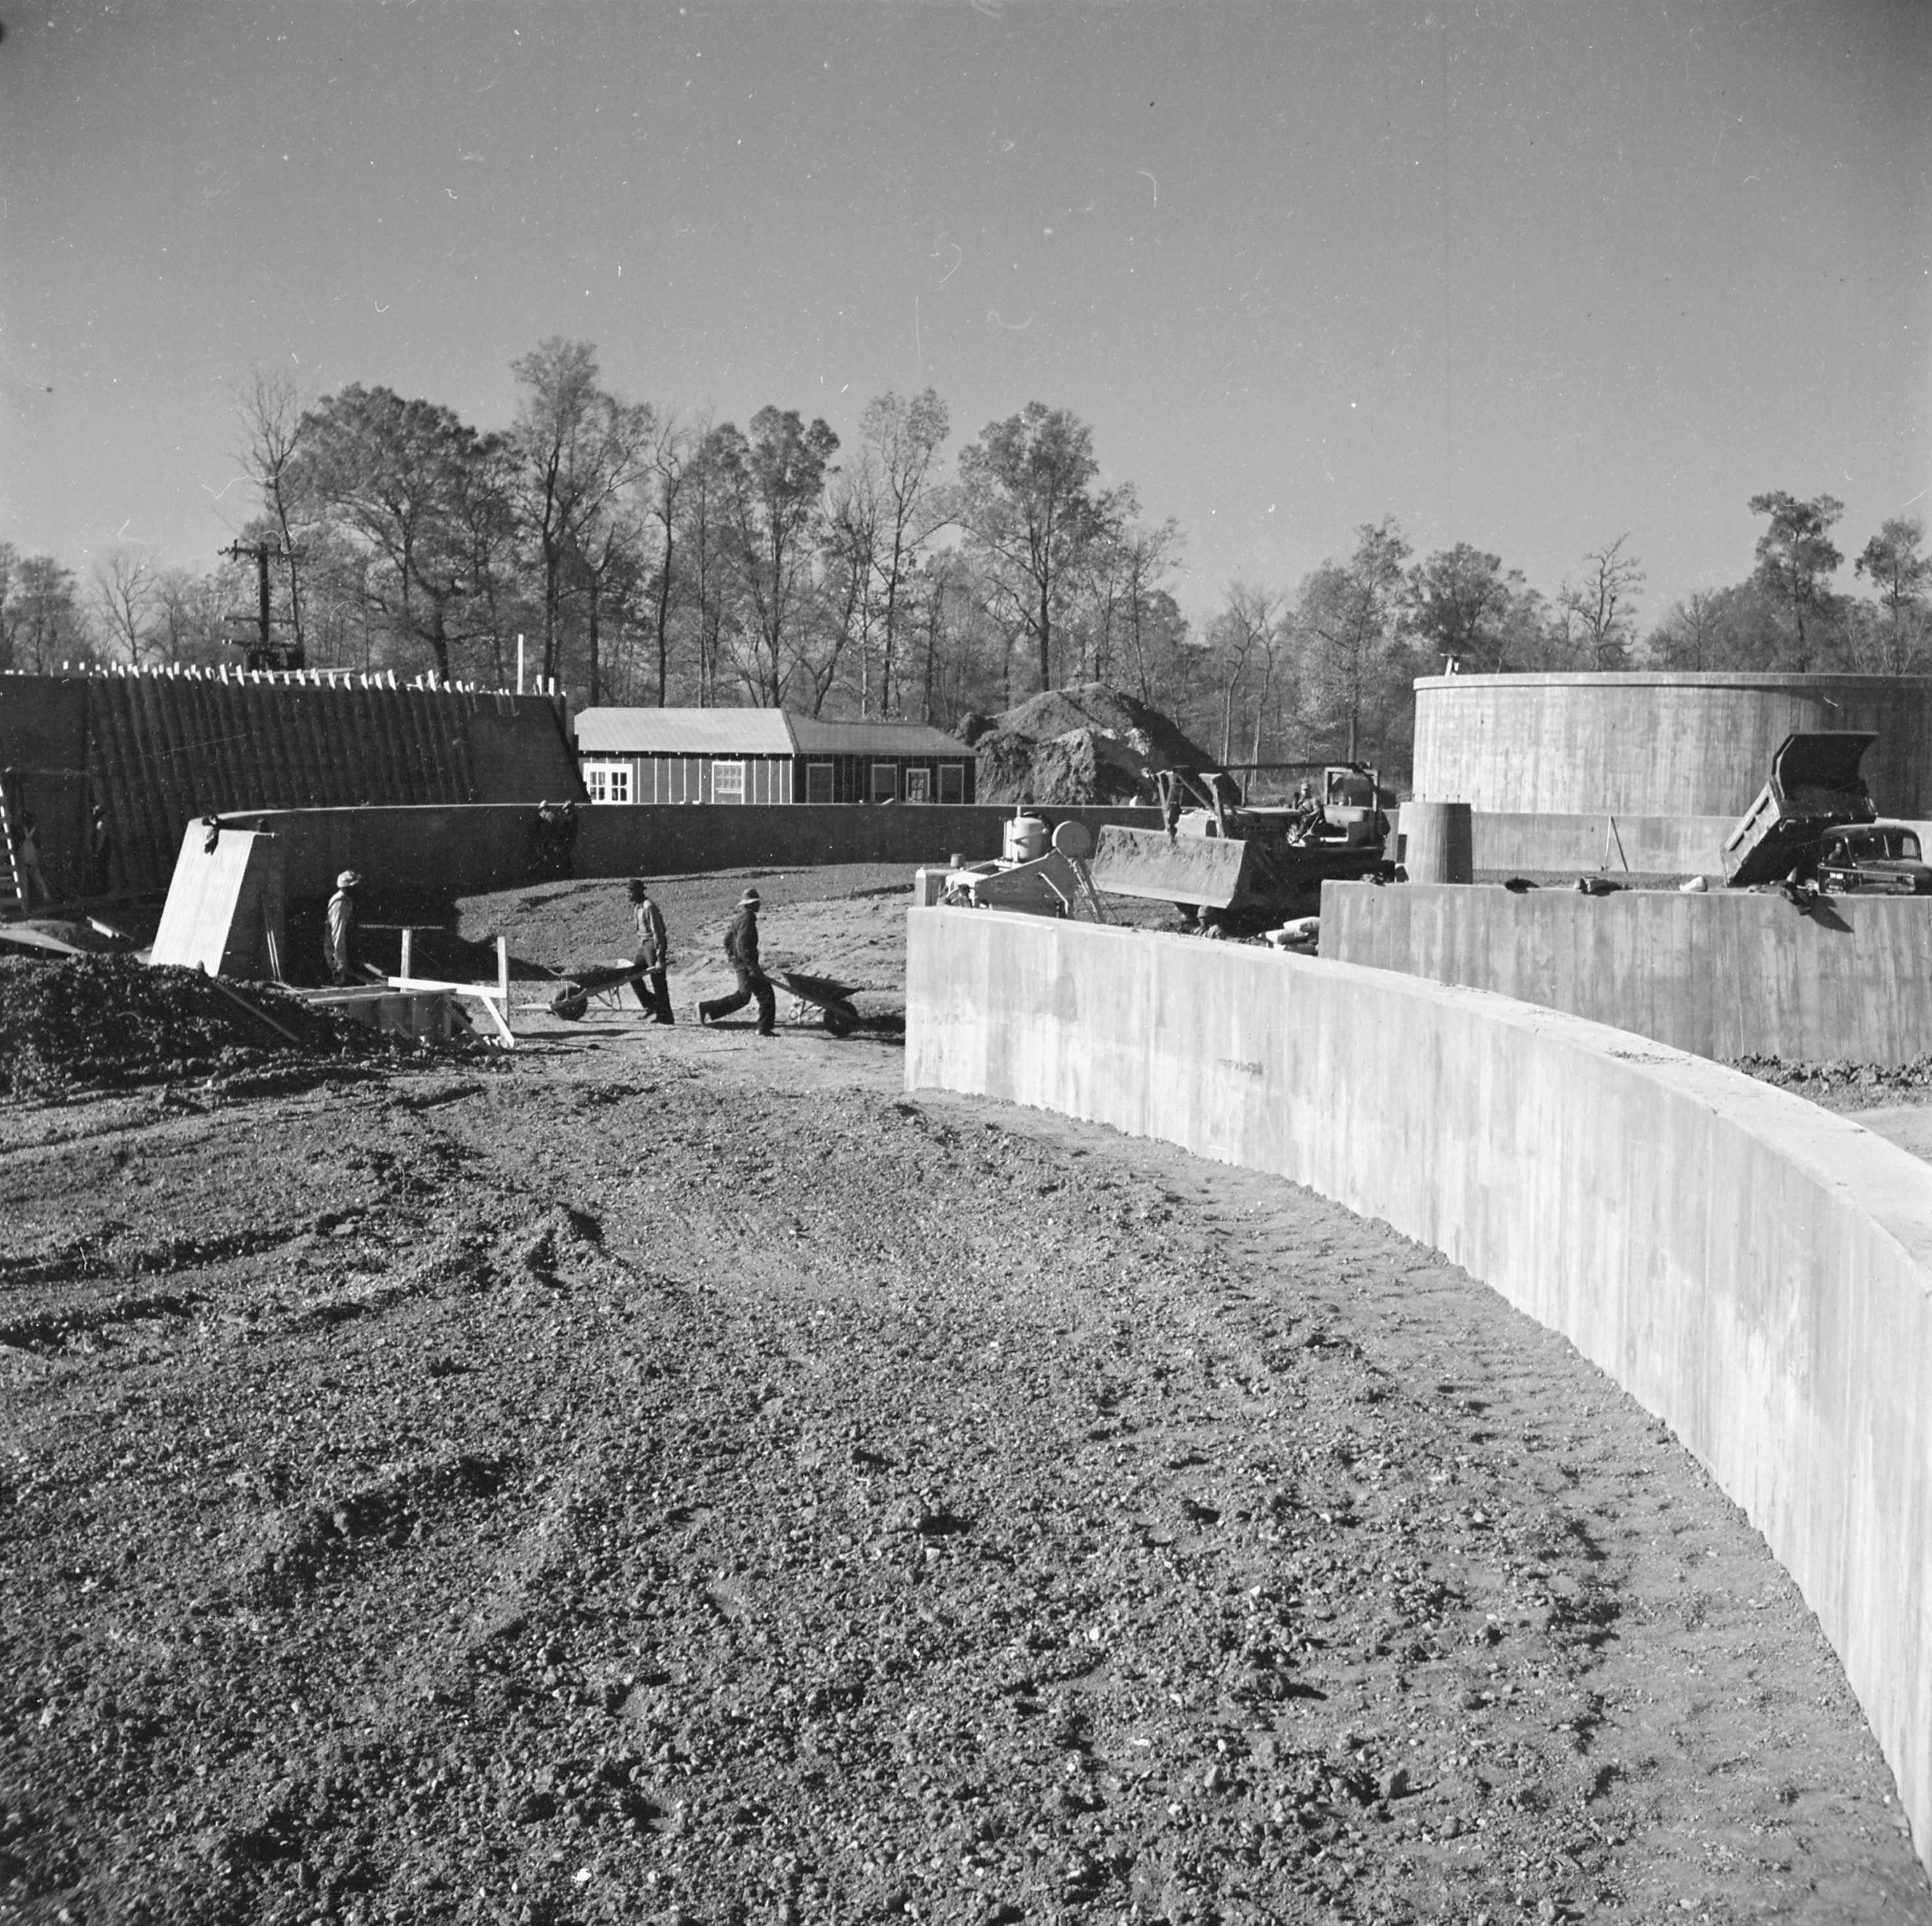 Construction of the sewage disposal plant at Jerome War Relocation Center, Arkansas, United States, 16 Nov 1942